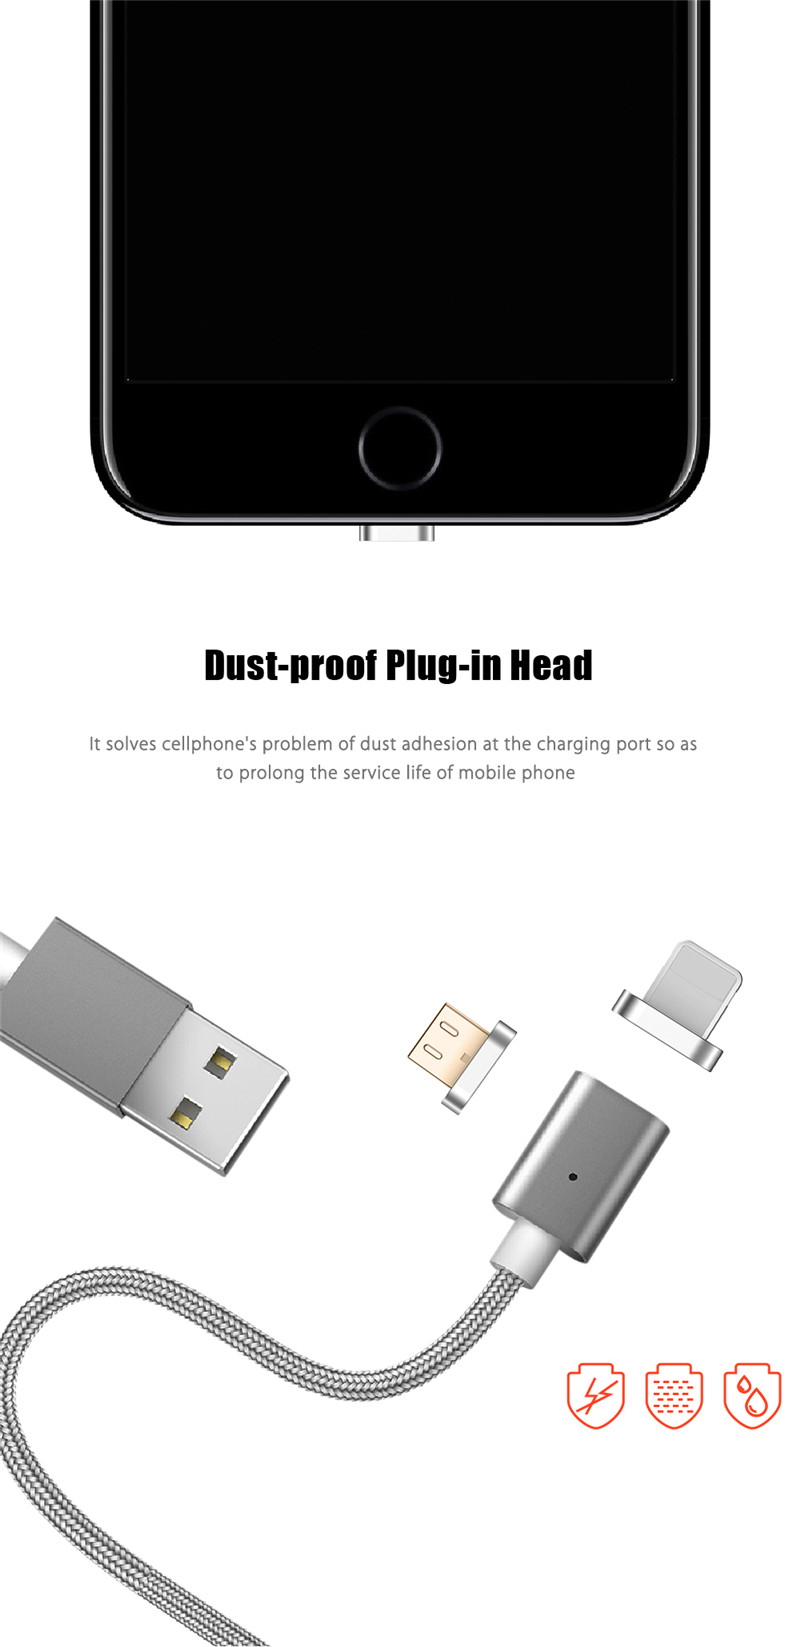 Magnetic Suction 8 Pin Micro USB Adapter Charging Data Transmission Cable